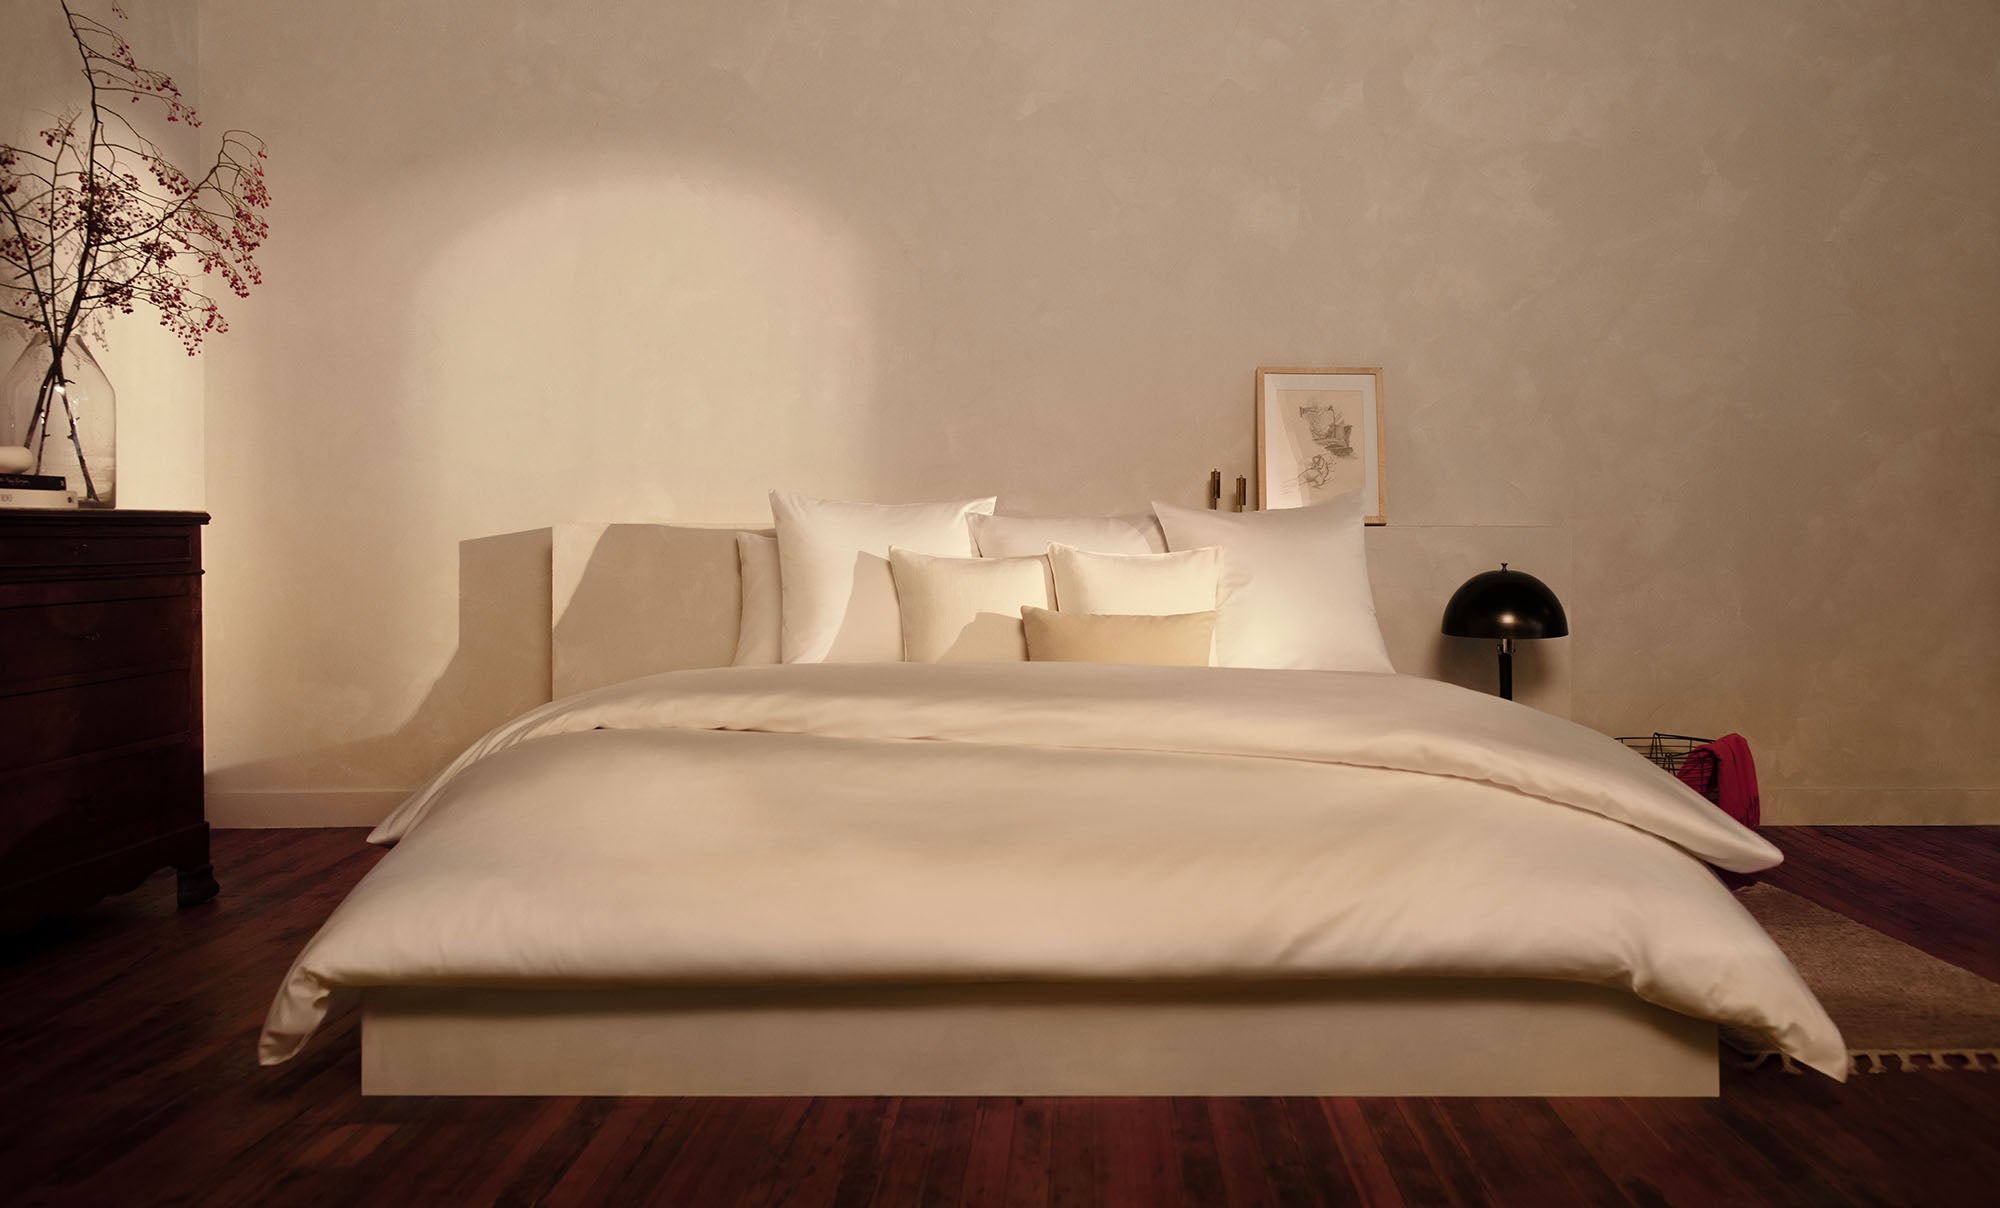 Image of contemporary bedroom with king size bed made in LETTO Sea Island Sateen sheets and duvet cover.